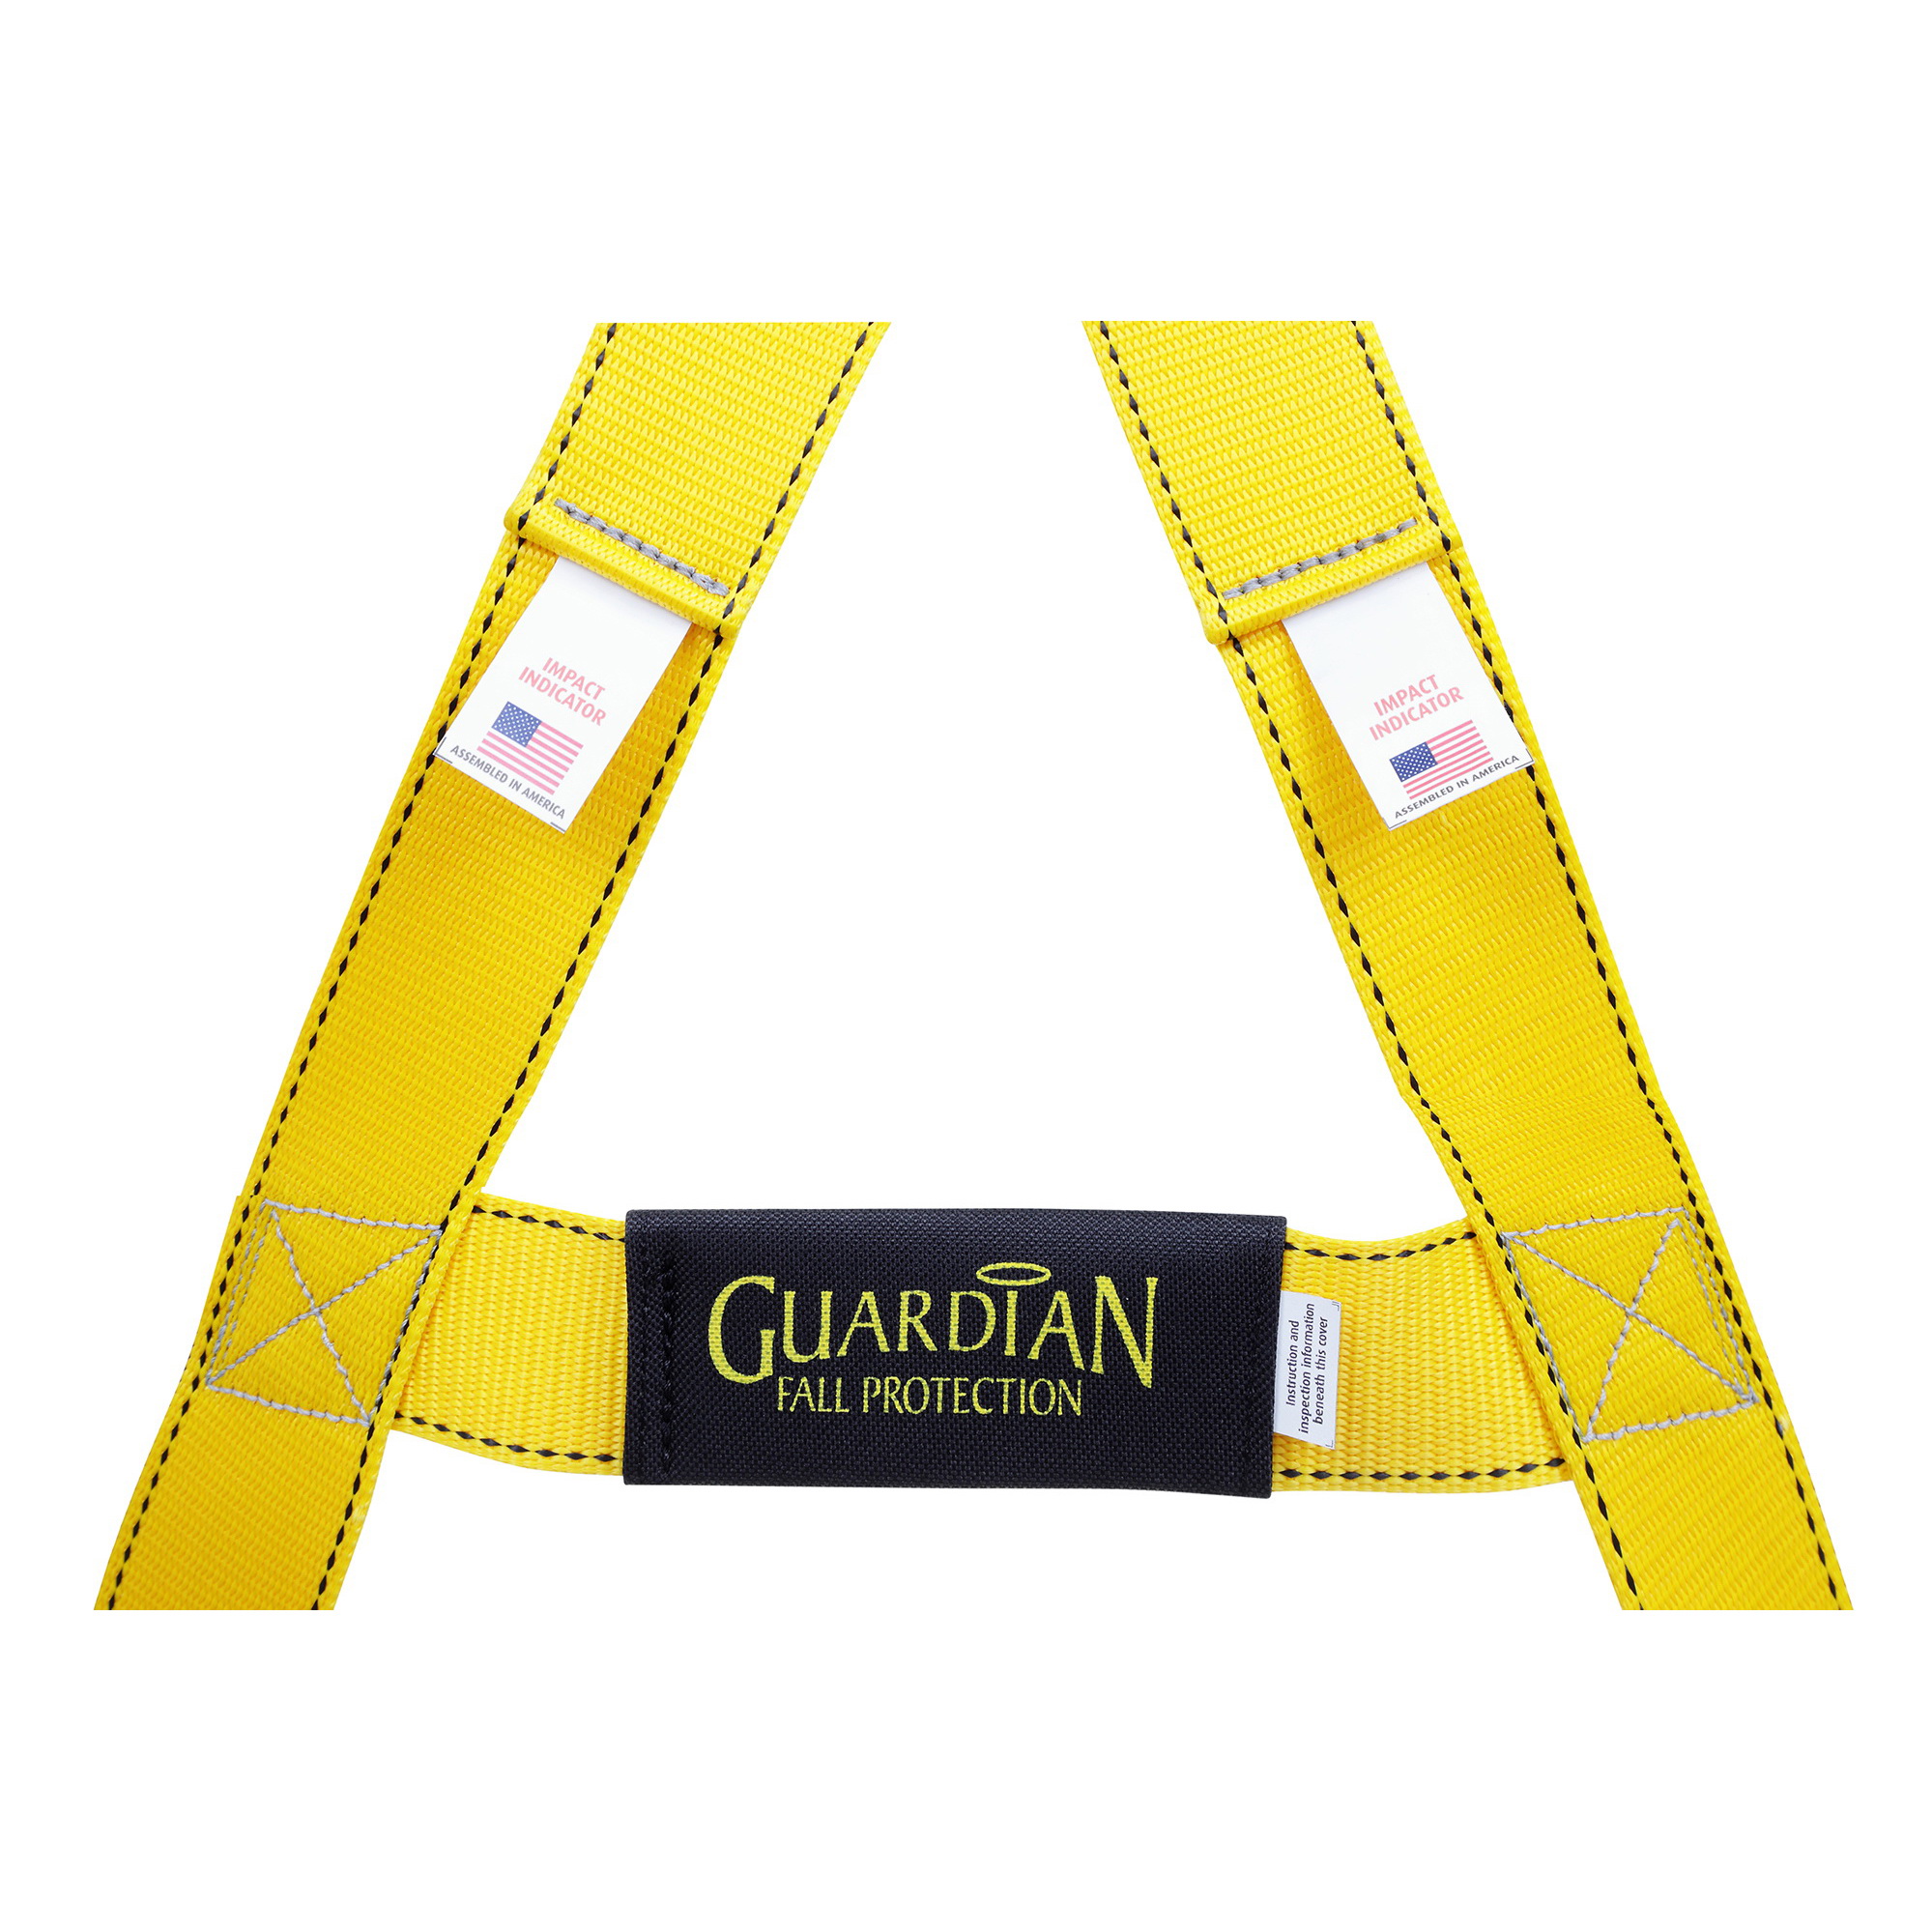 Guardian Fall Protection 37002 Full Body Harness, XL/2XL, 130 to 420 lb, Polyester Webbing, Black/Yellow - 5